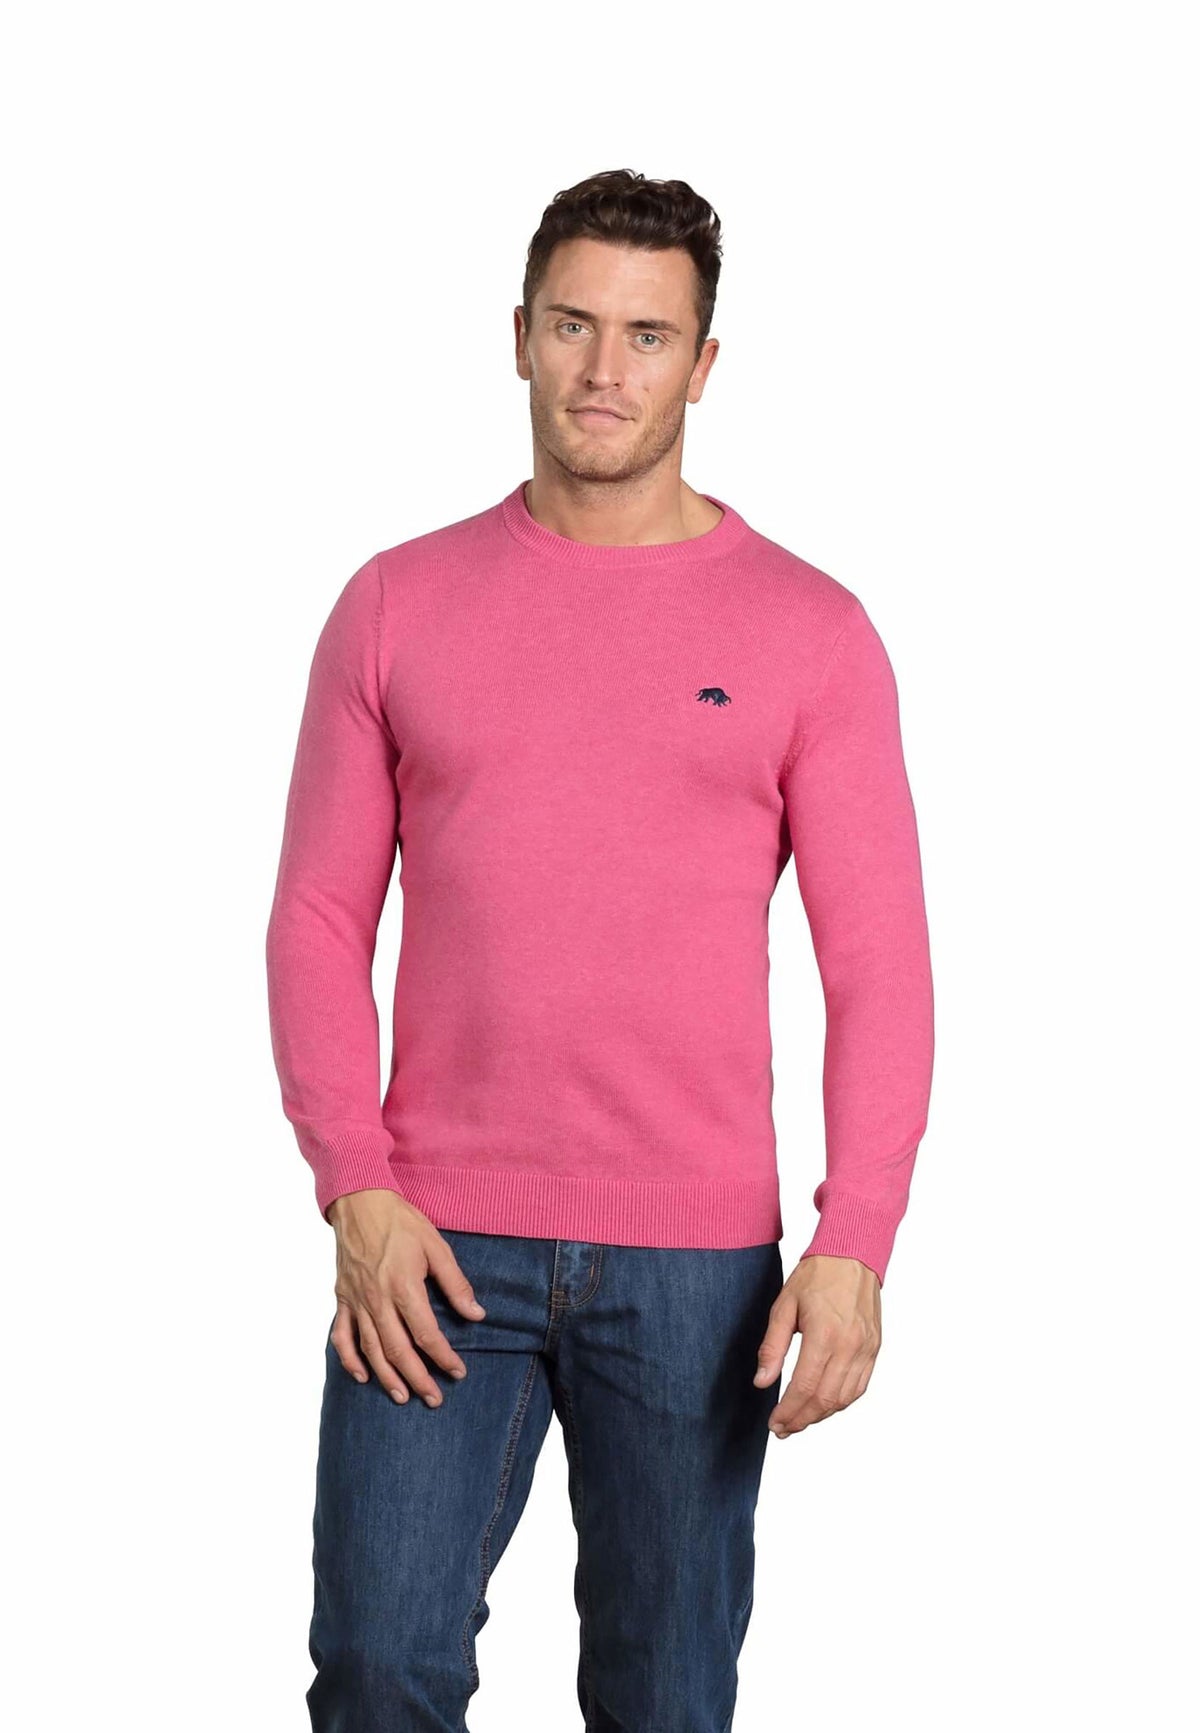 Knitted Cotton/Cashmere Crew Neck - Pink